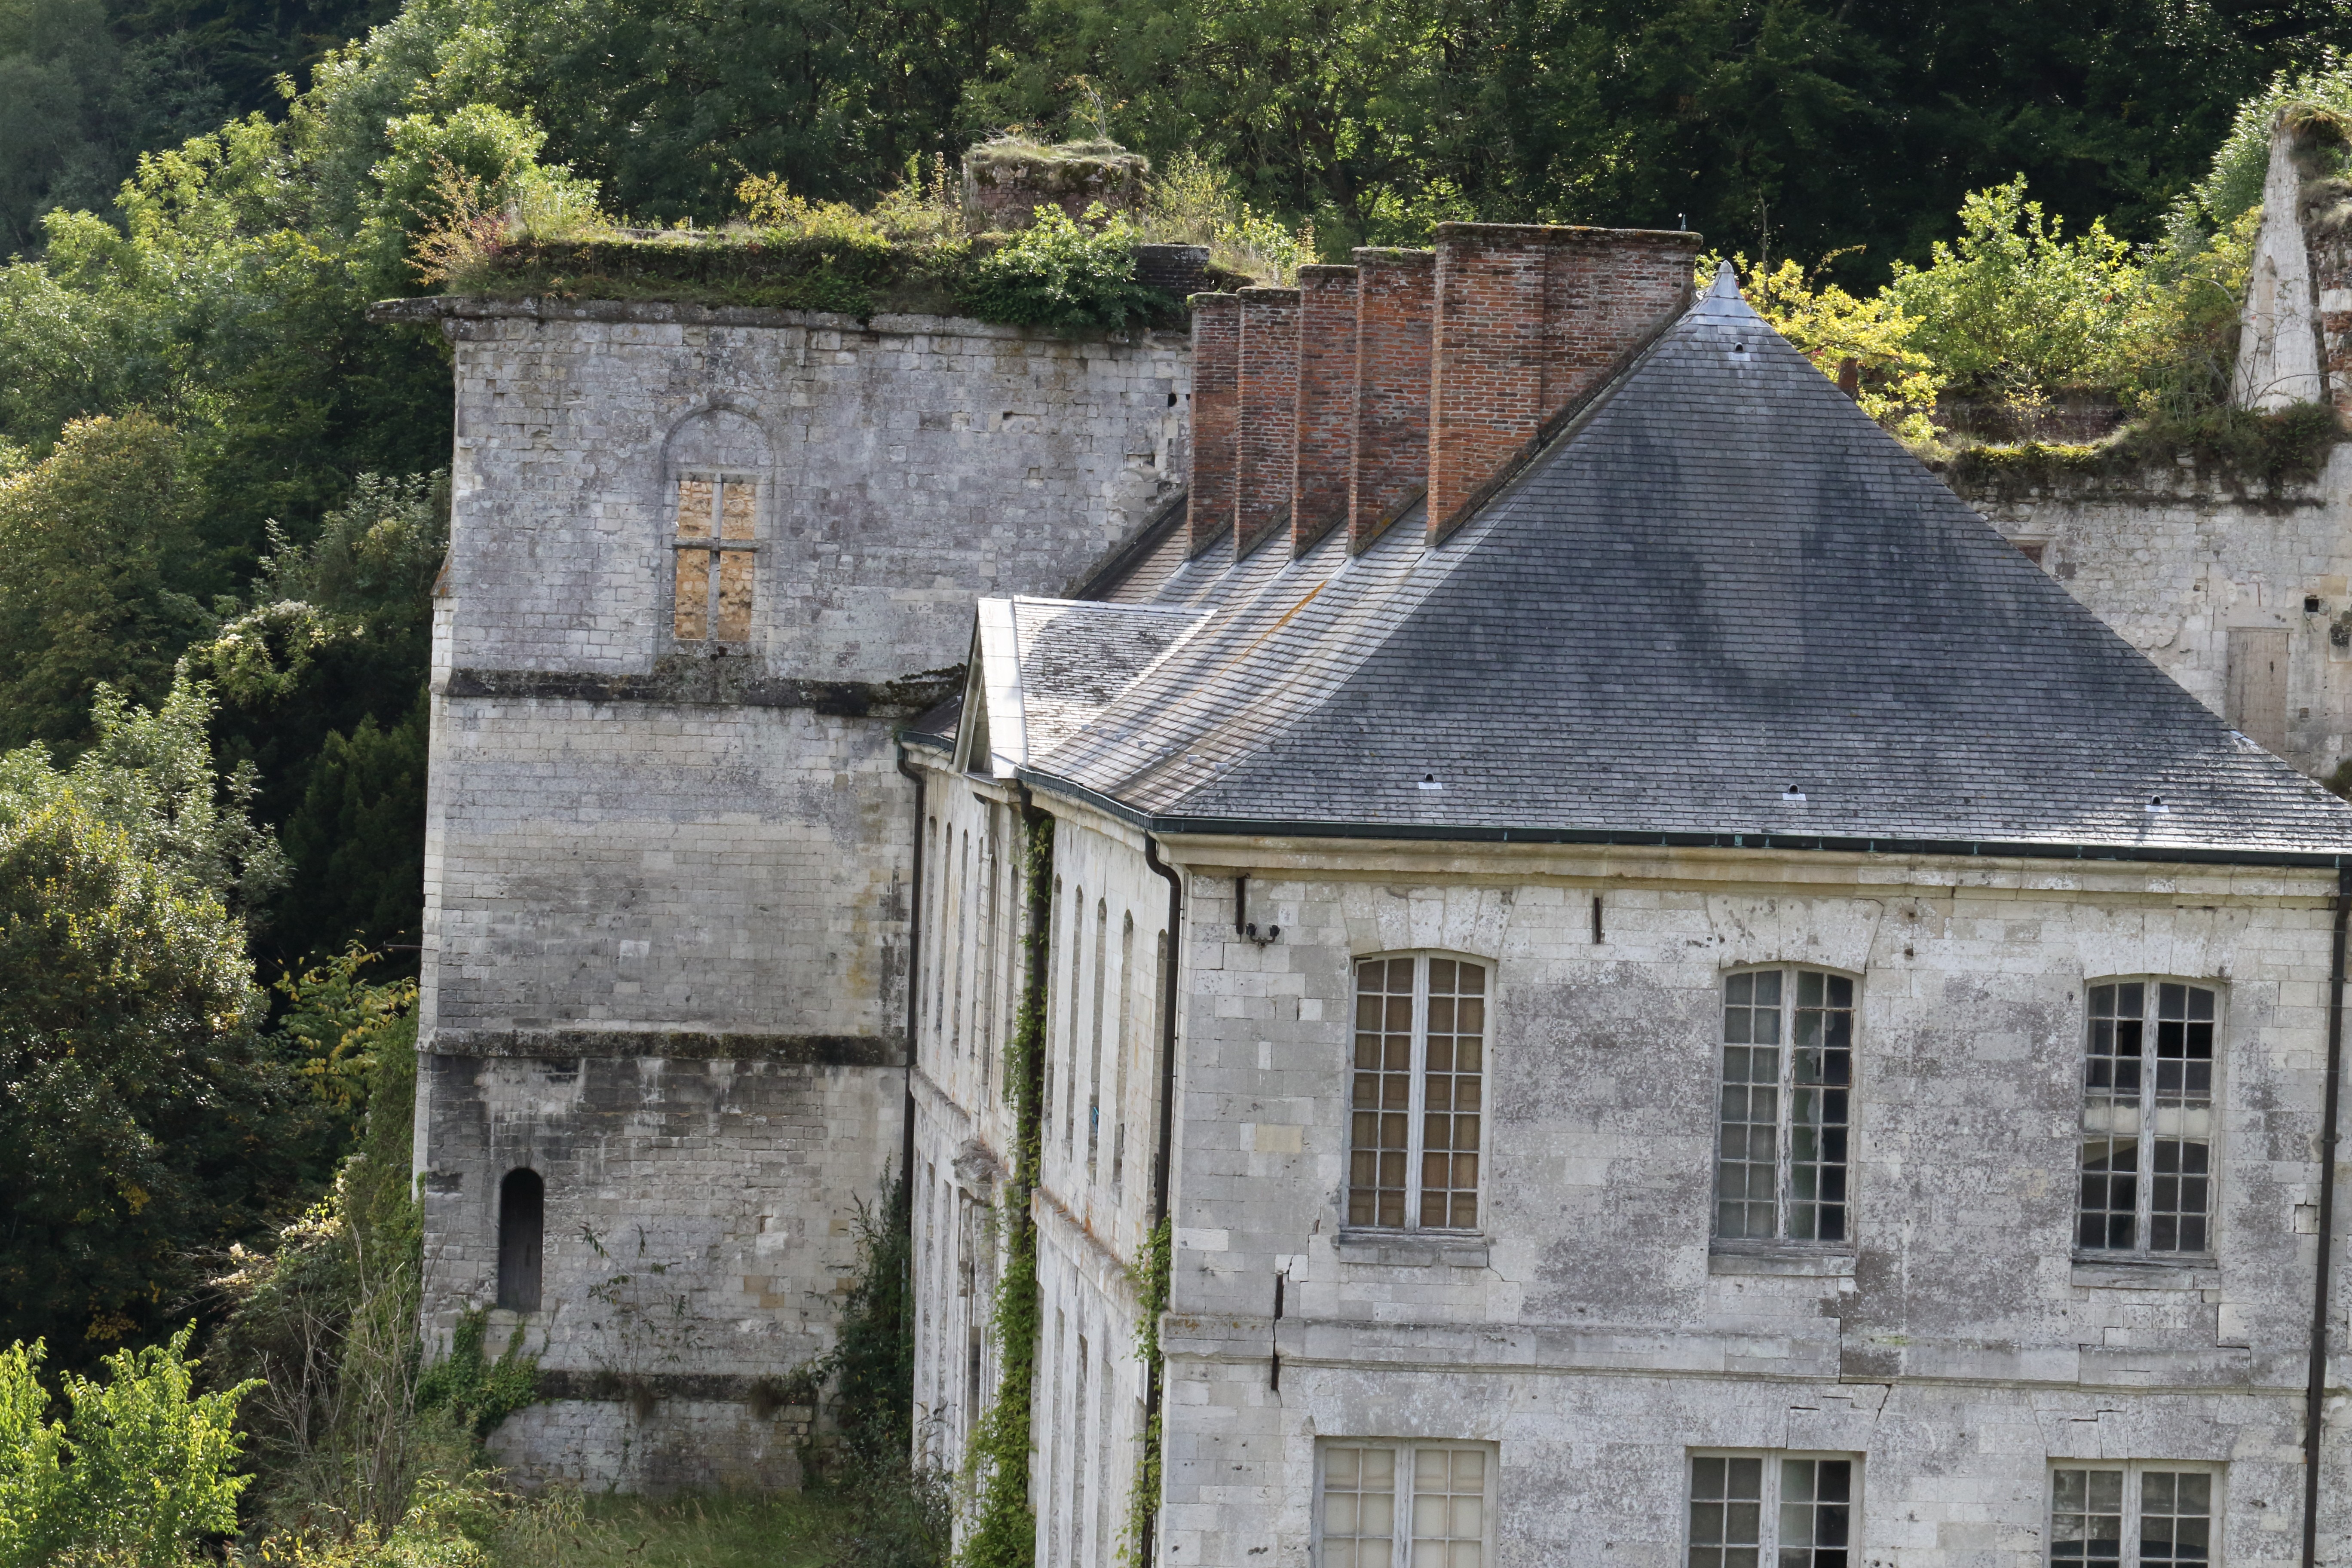 The Footballers and forgotten château de Tancarville – a story of heritage  in danger - Normandy Then and Now